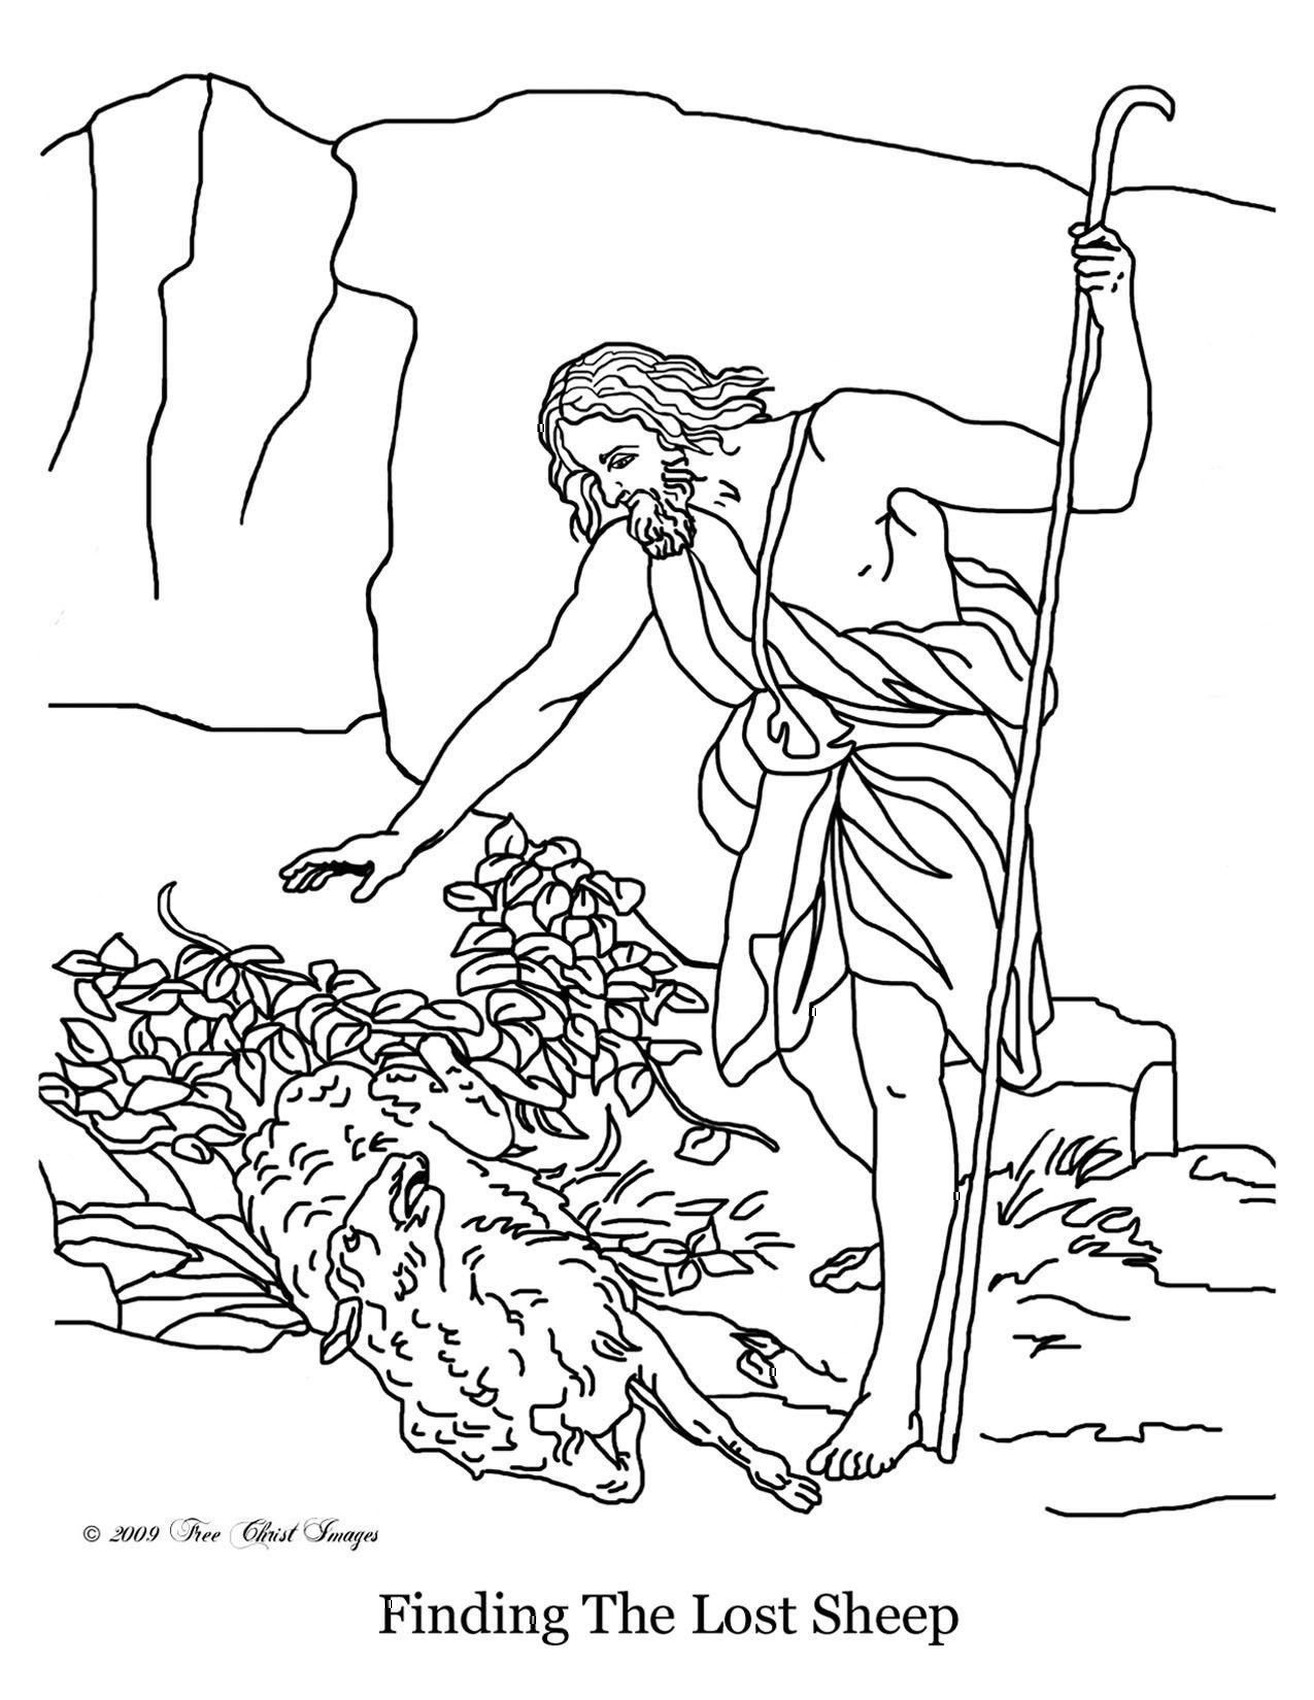 Free Bible Coloring Book Pages, Printable Bible Coloring Page